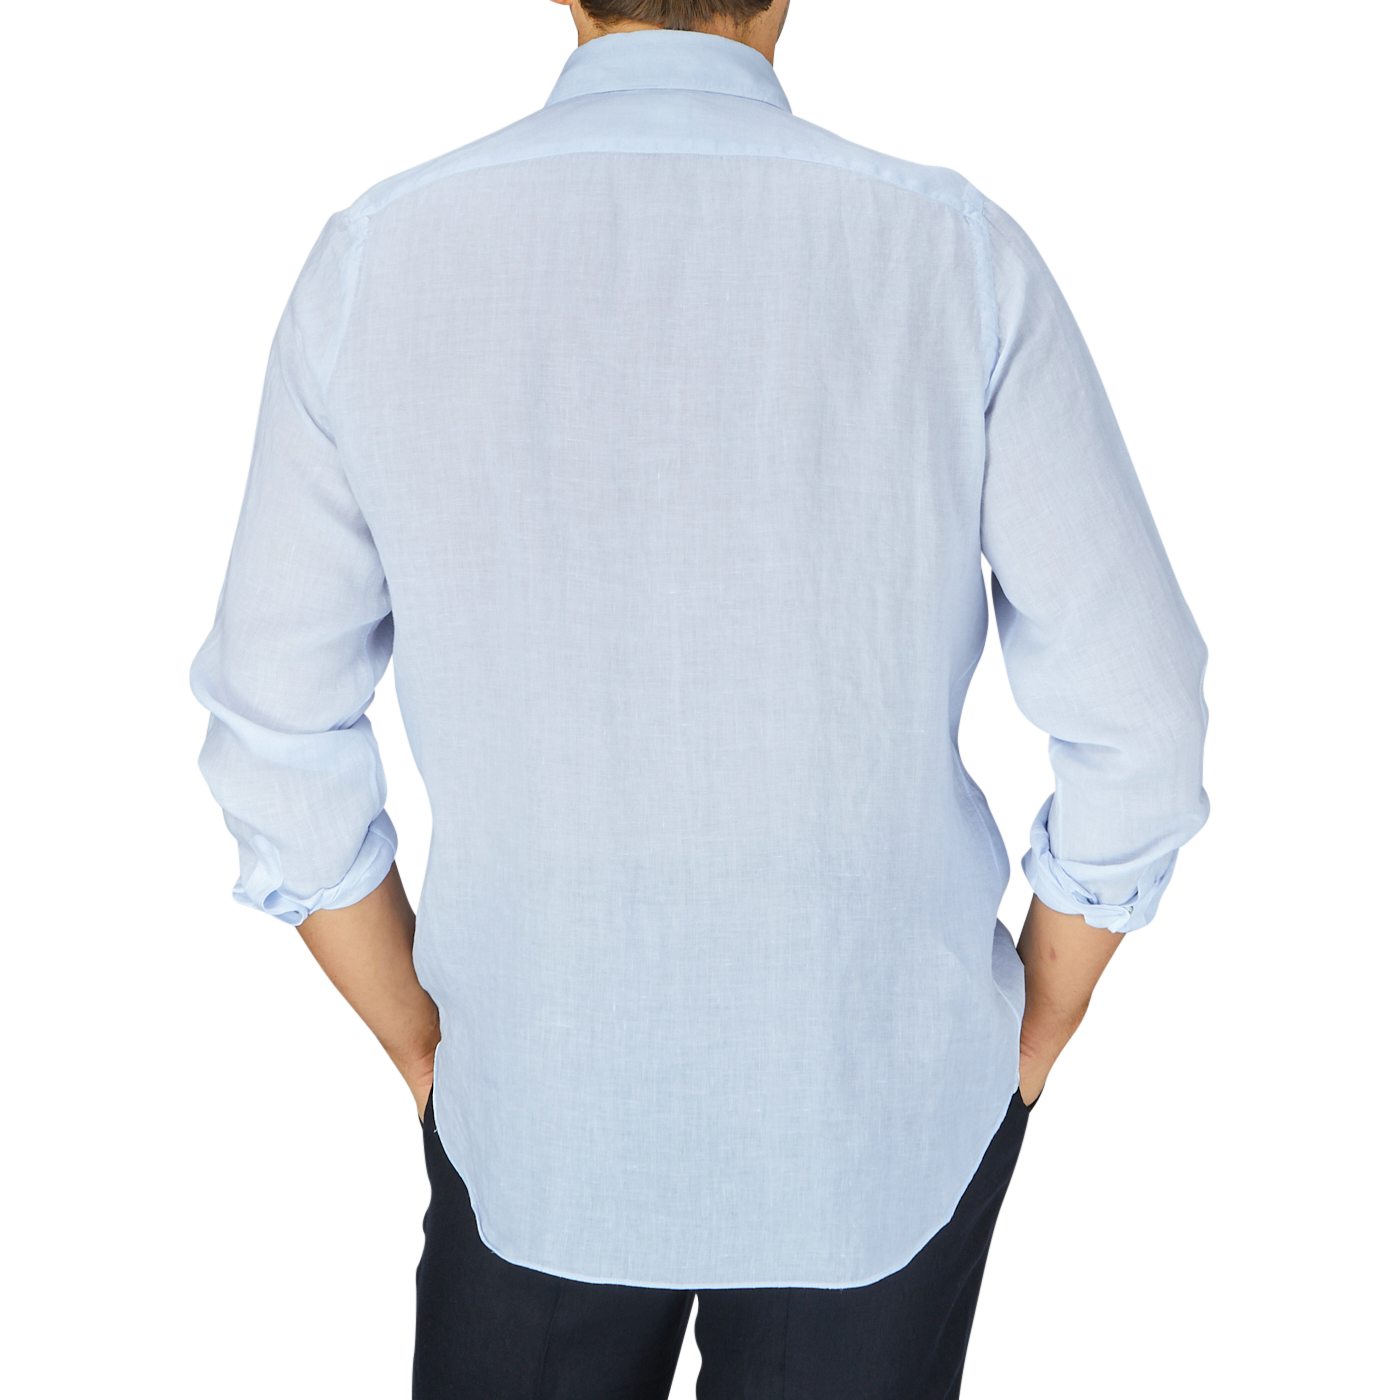 Man standing with his back to the camera, wearing a Finamore light blue linen casual shirt and dark trousers.